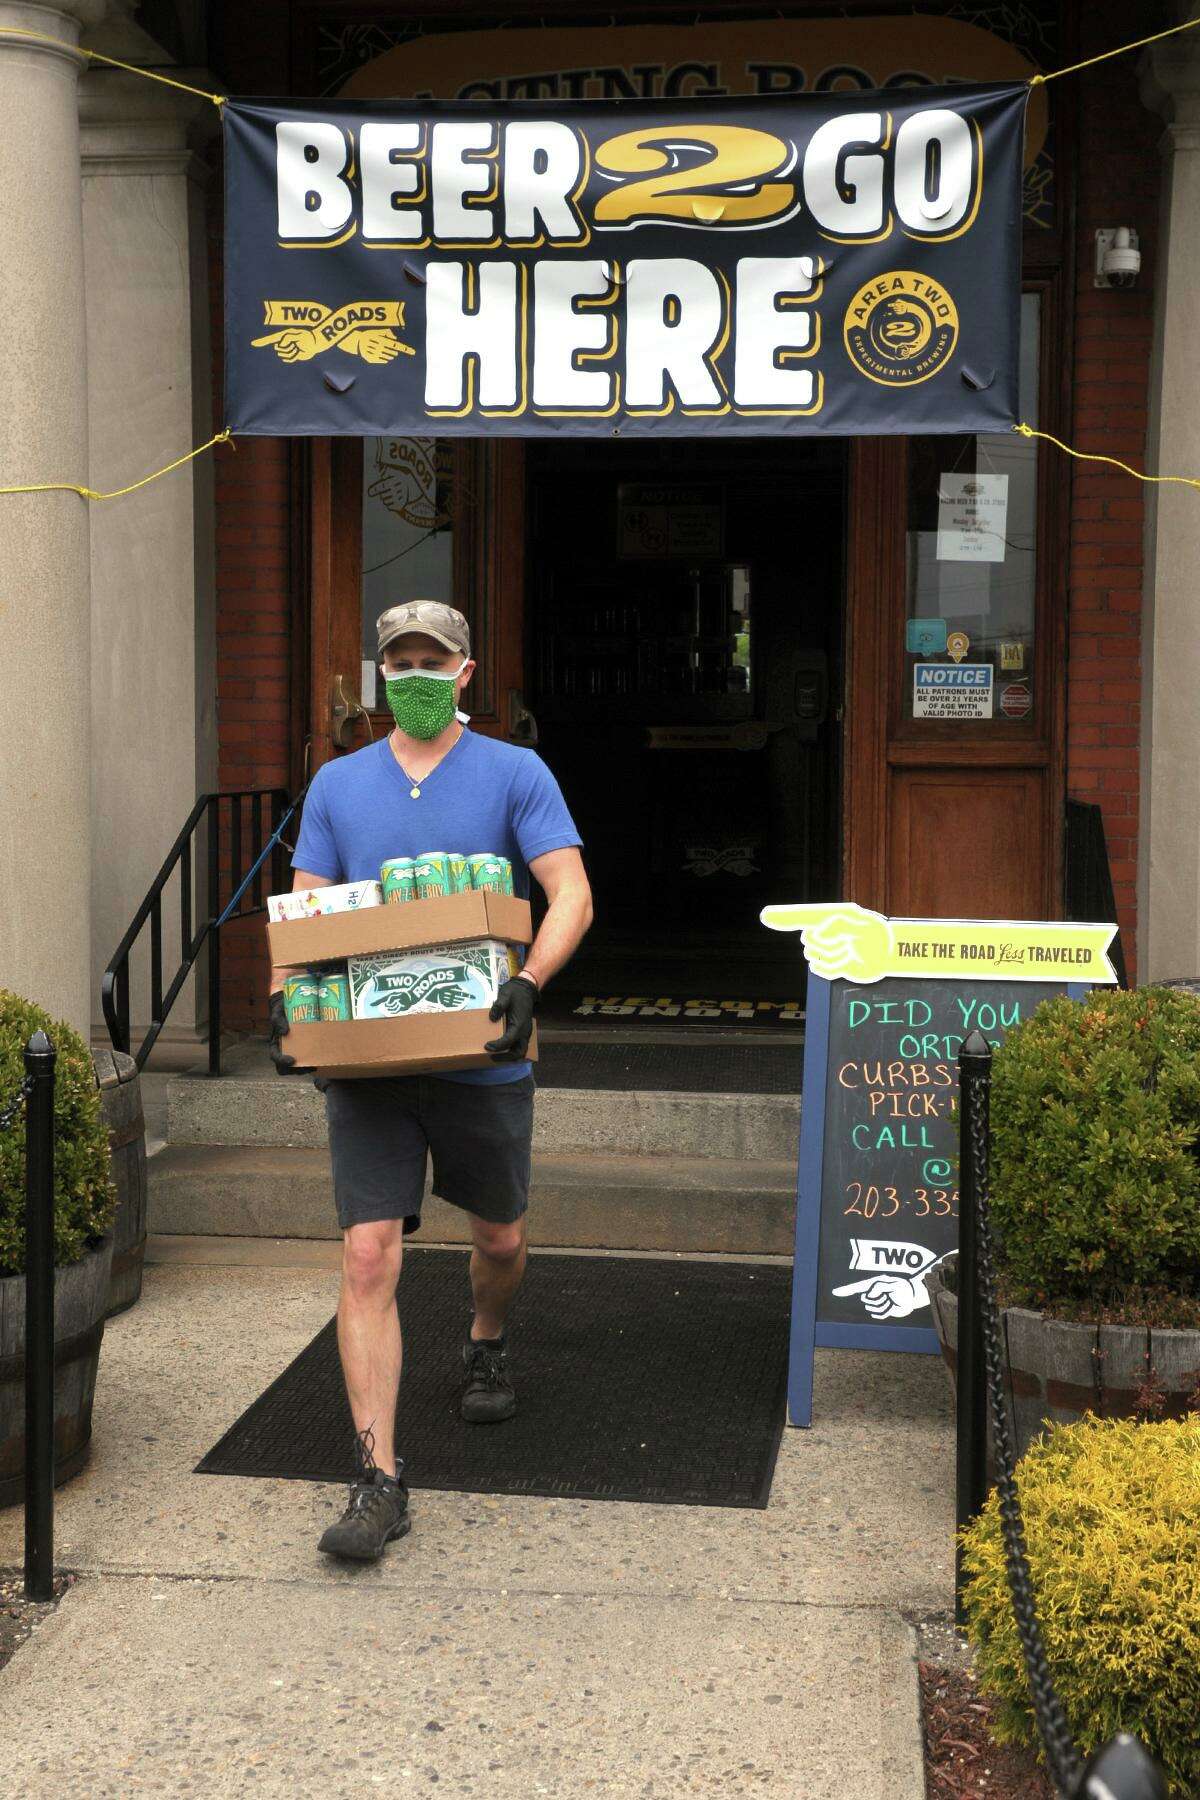 Ted Pert, taproom manager at Two Roads Brewing Company, delivers beer order to a waiting vehicle outside the brewery in Stratford, Conn. April 23, 2020. While Two Road’s taproom remains closed, the brewery is open for online orders and curbside pickup.